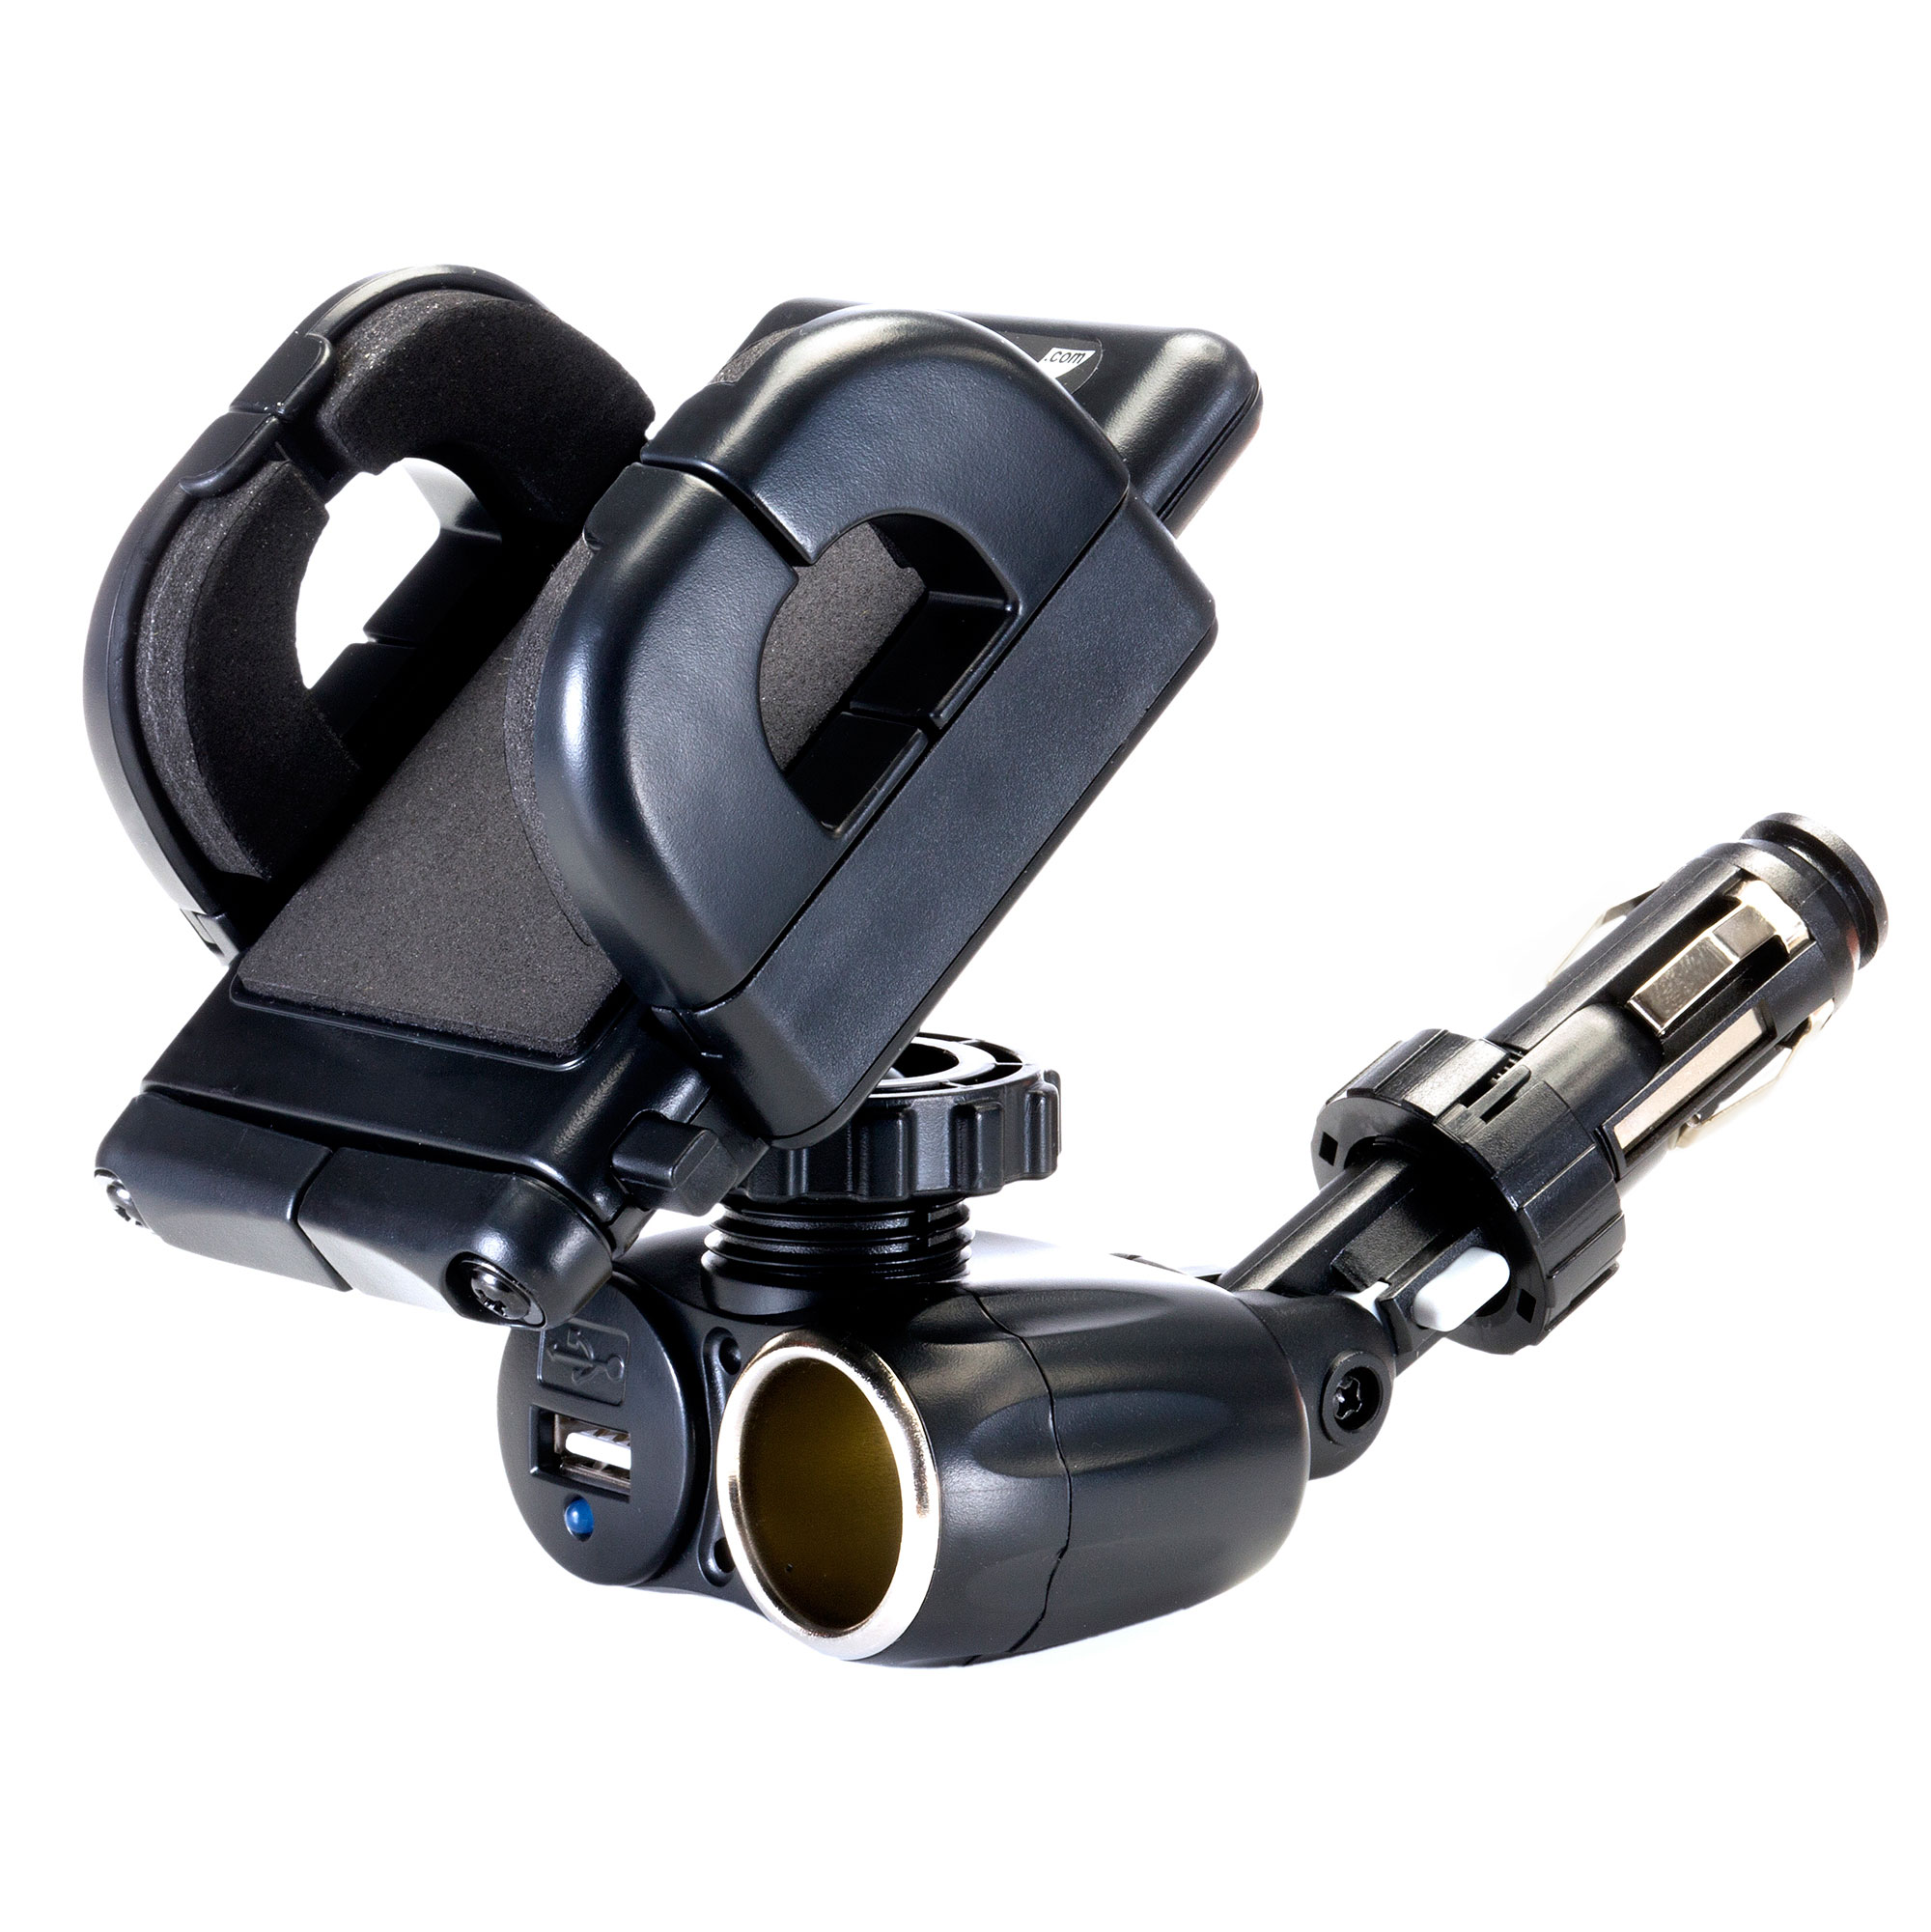 Dual USB / 12V Charger Car Cigarette Lighter Mount and Holder for the Nokia Lumia 900